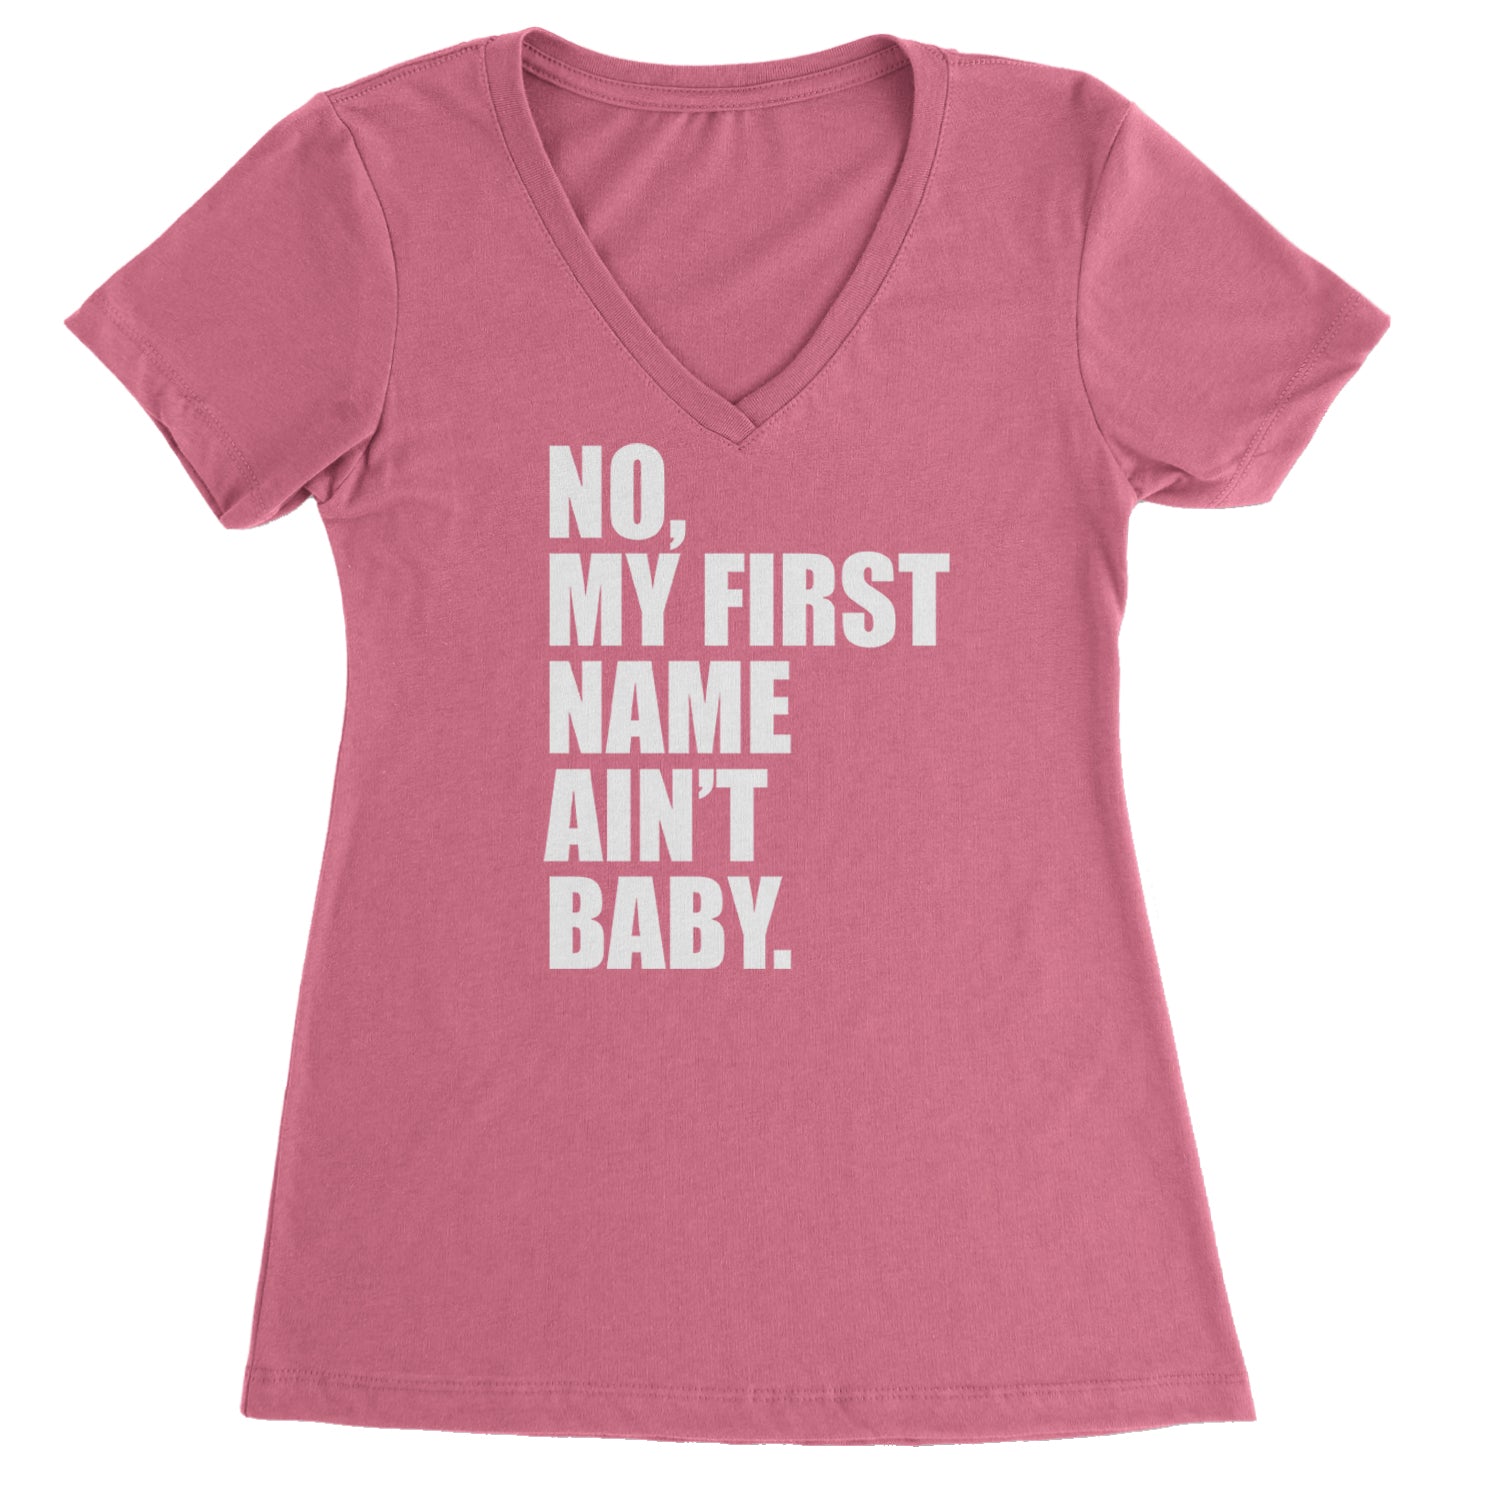 No My First Name Ain't Baby Together Again Ladies V-Neck T-shirt Hot Pink